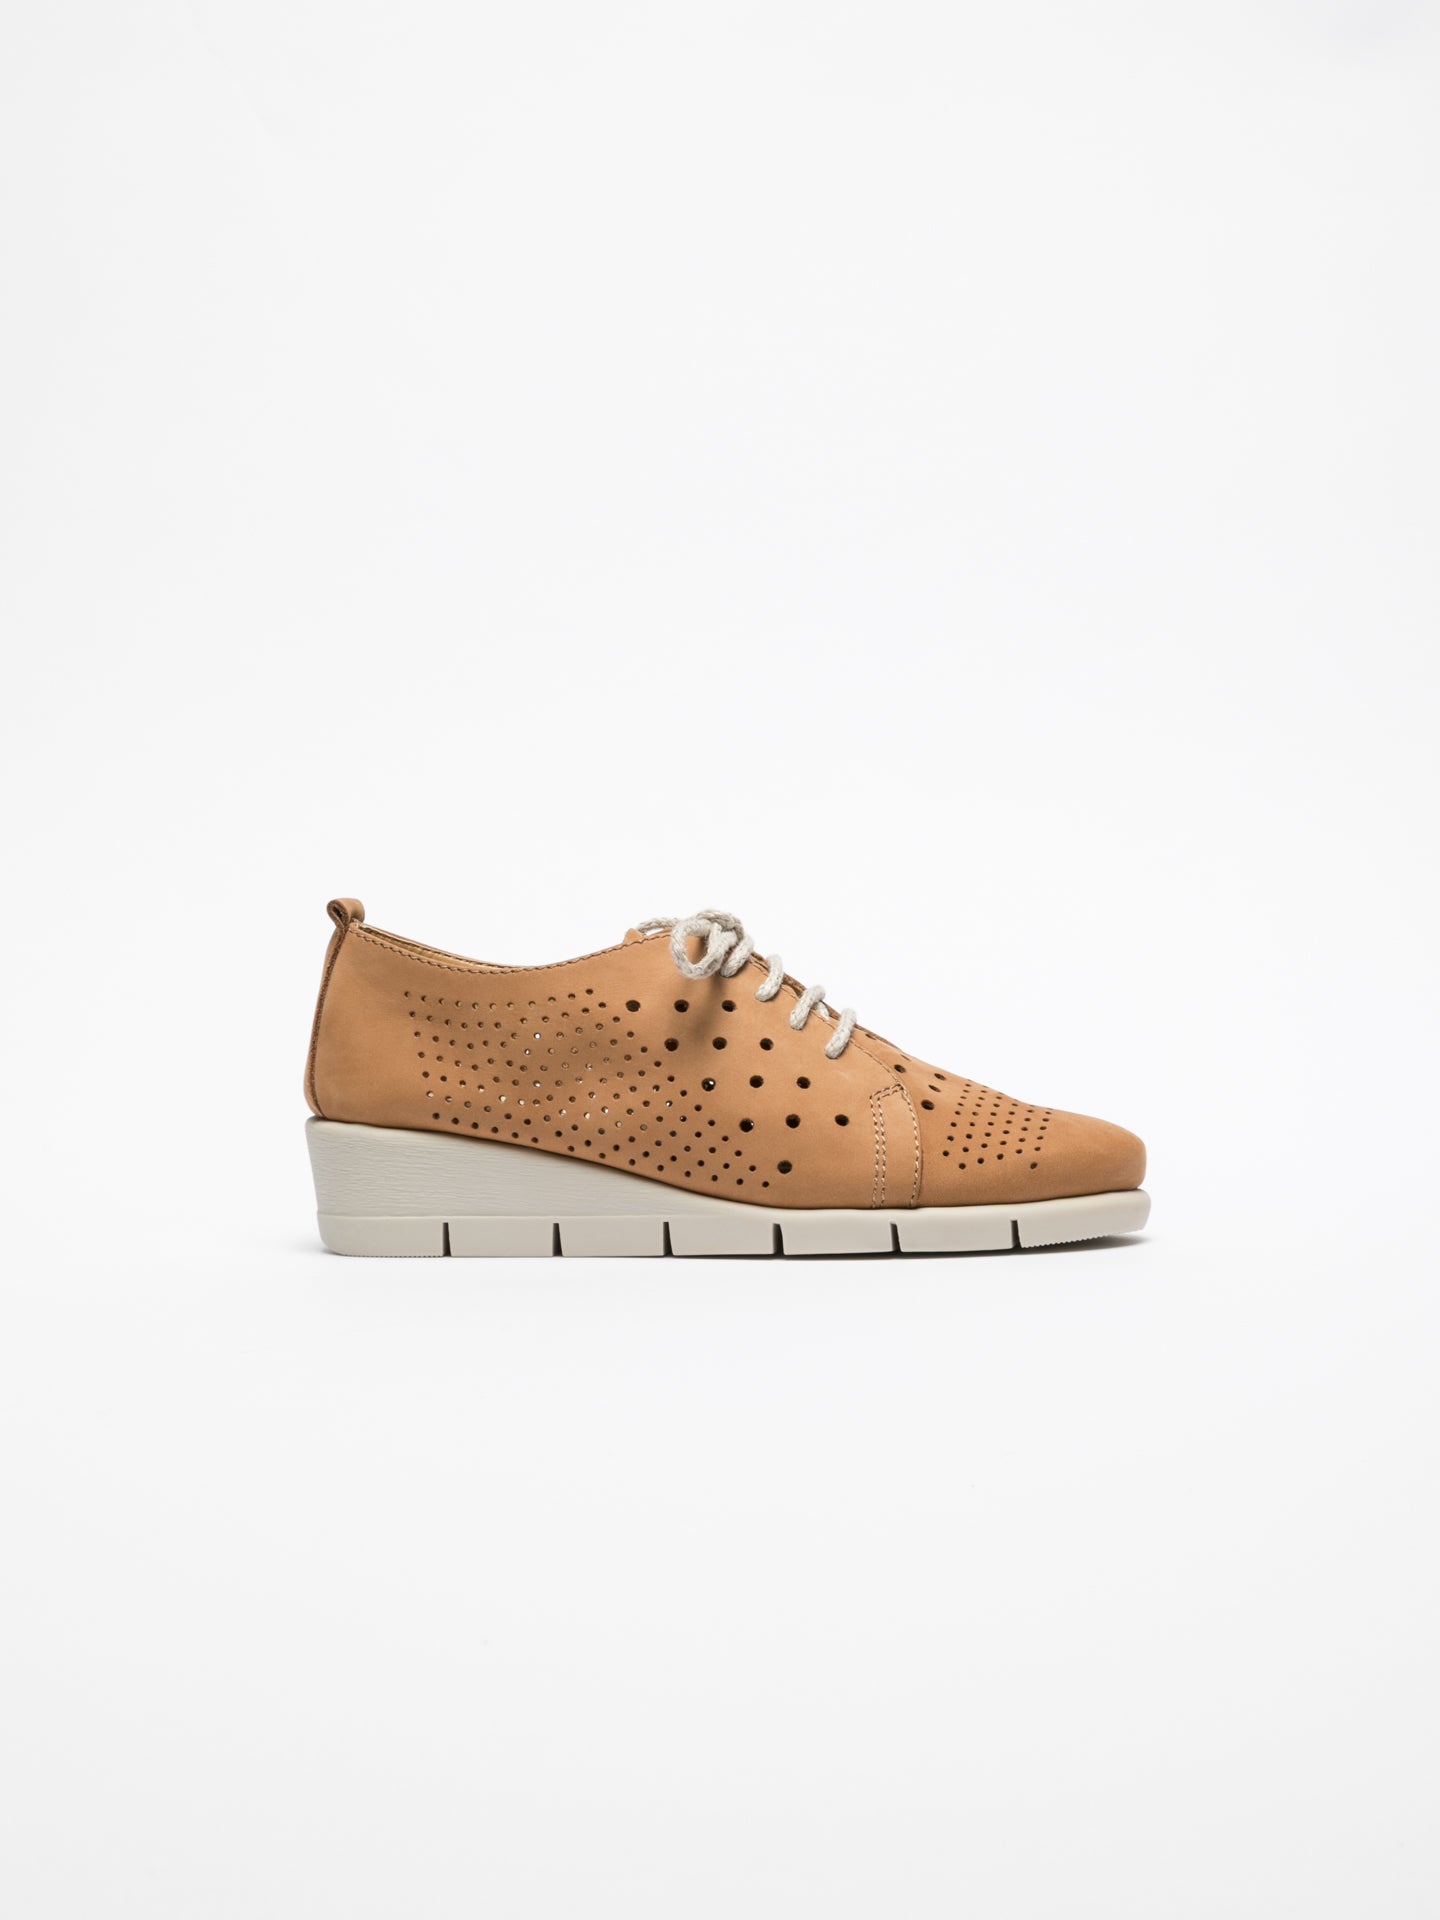 The Flexx Brown Lace Fastening Shoes